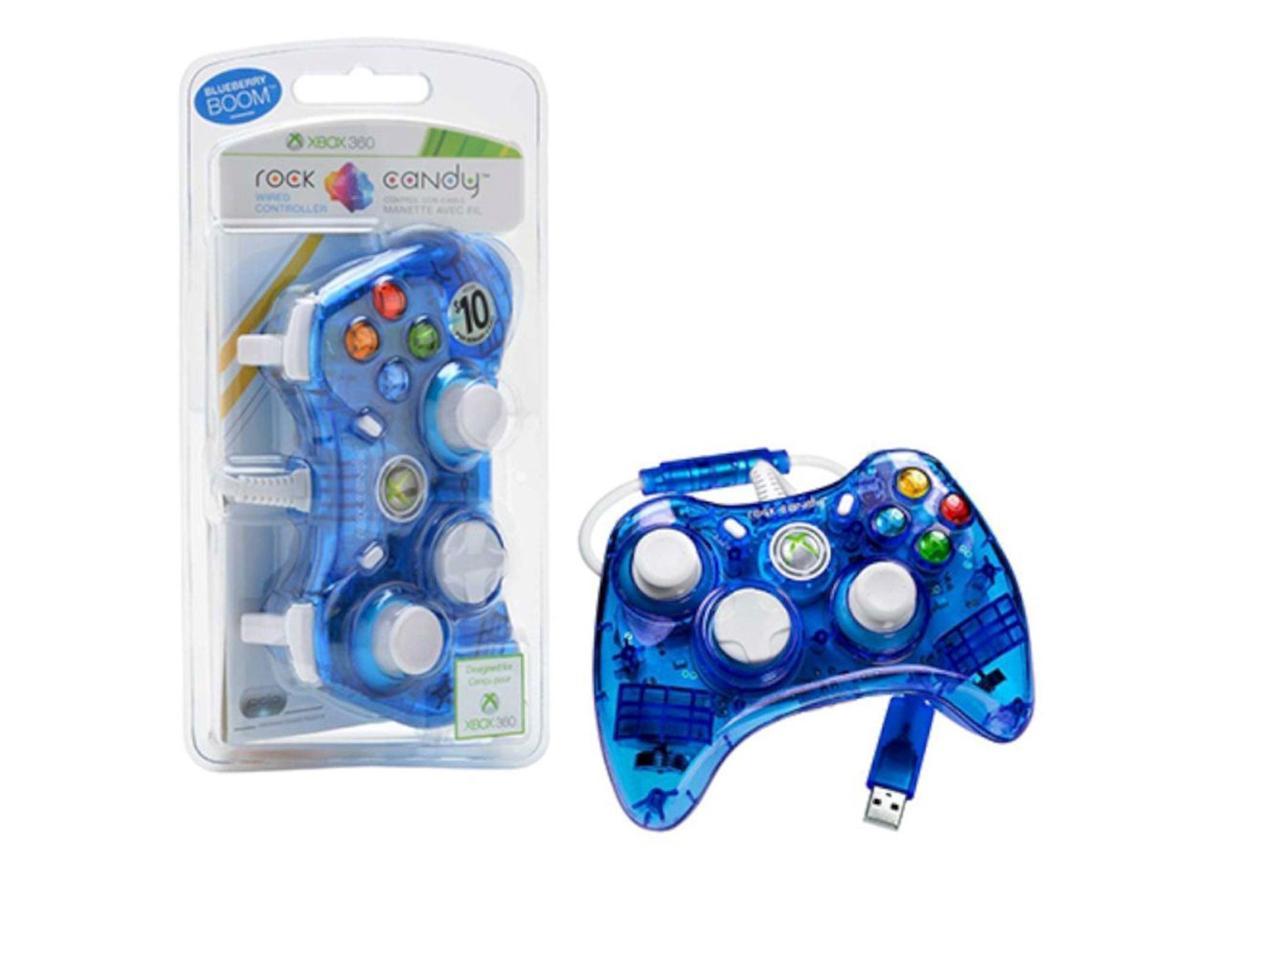 xbox 360 rock candy controller any good